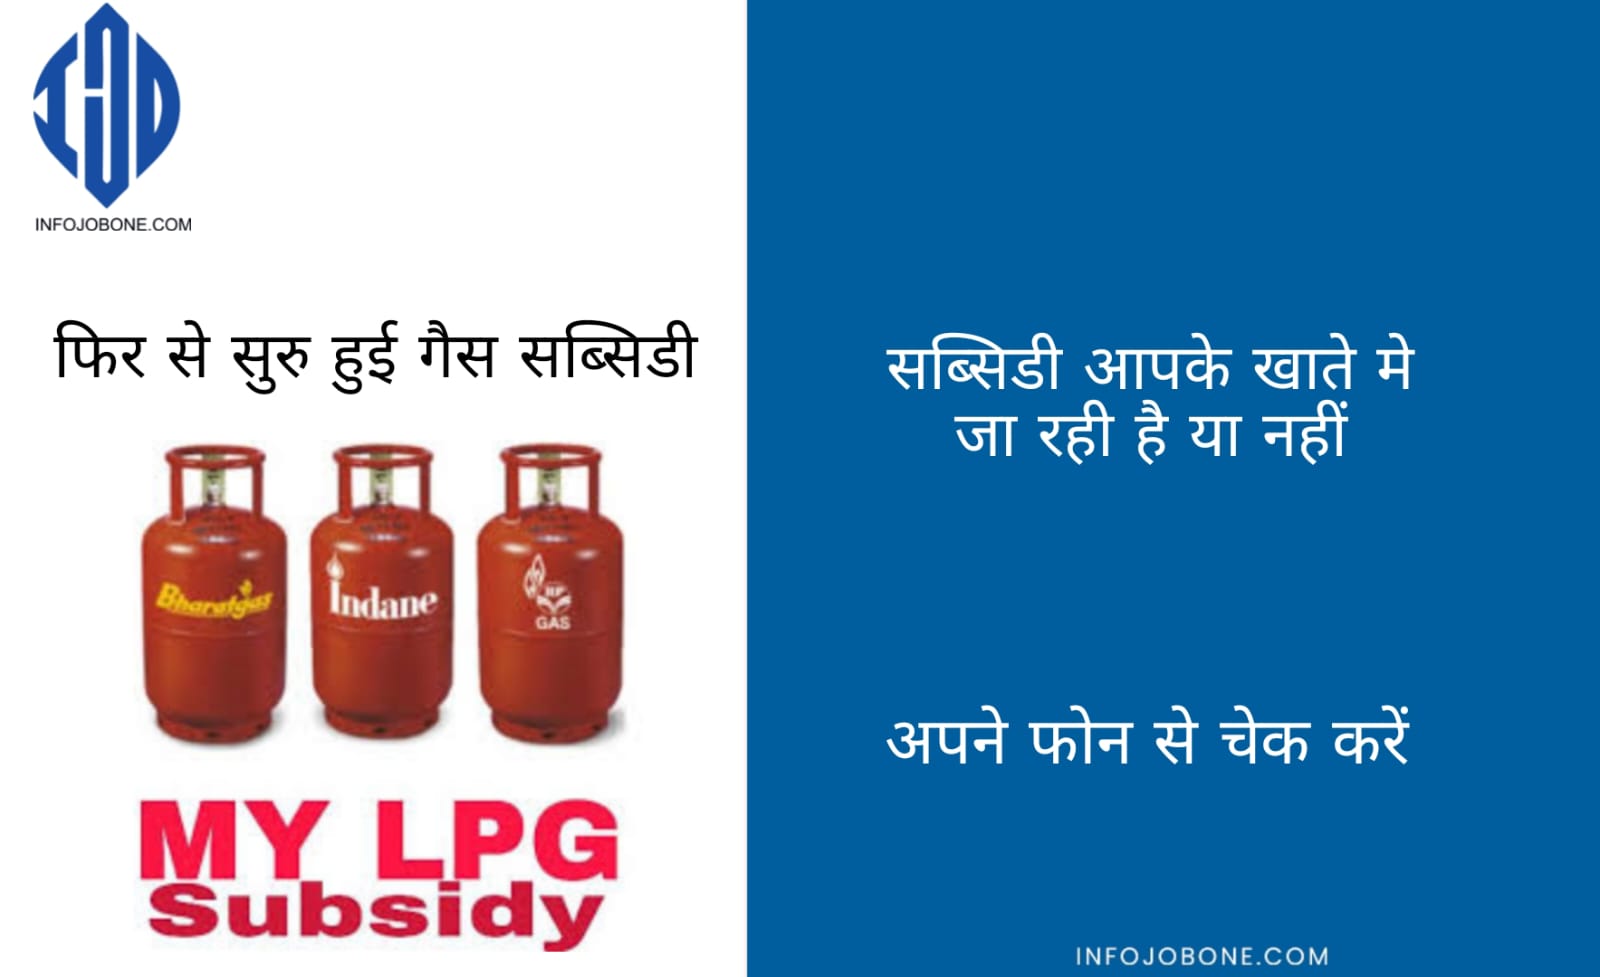 How To check Online Your Gas Subsidy Bharat Gas, HP Gas, Indane Gas [Mylpg.in]